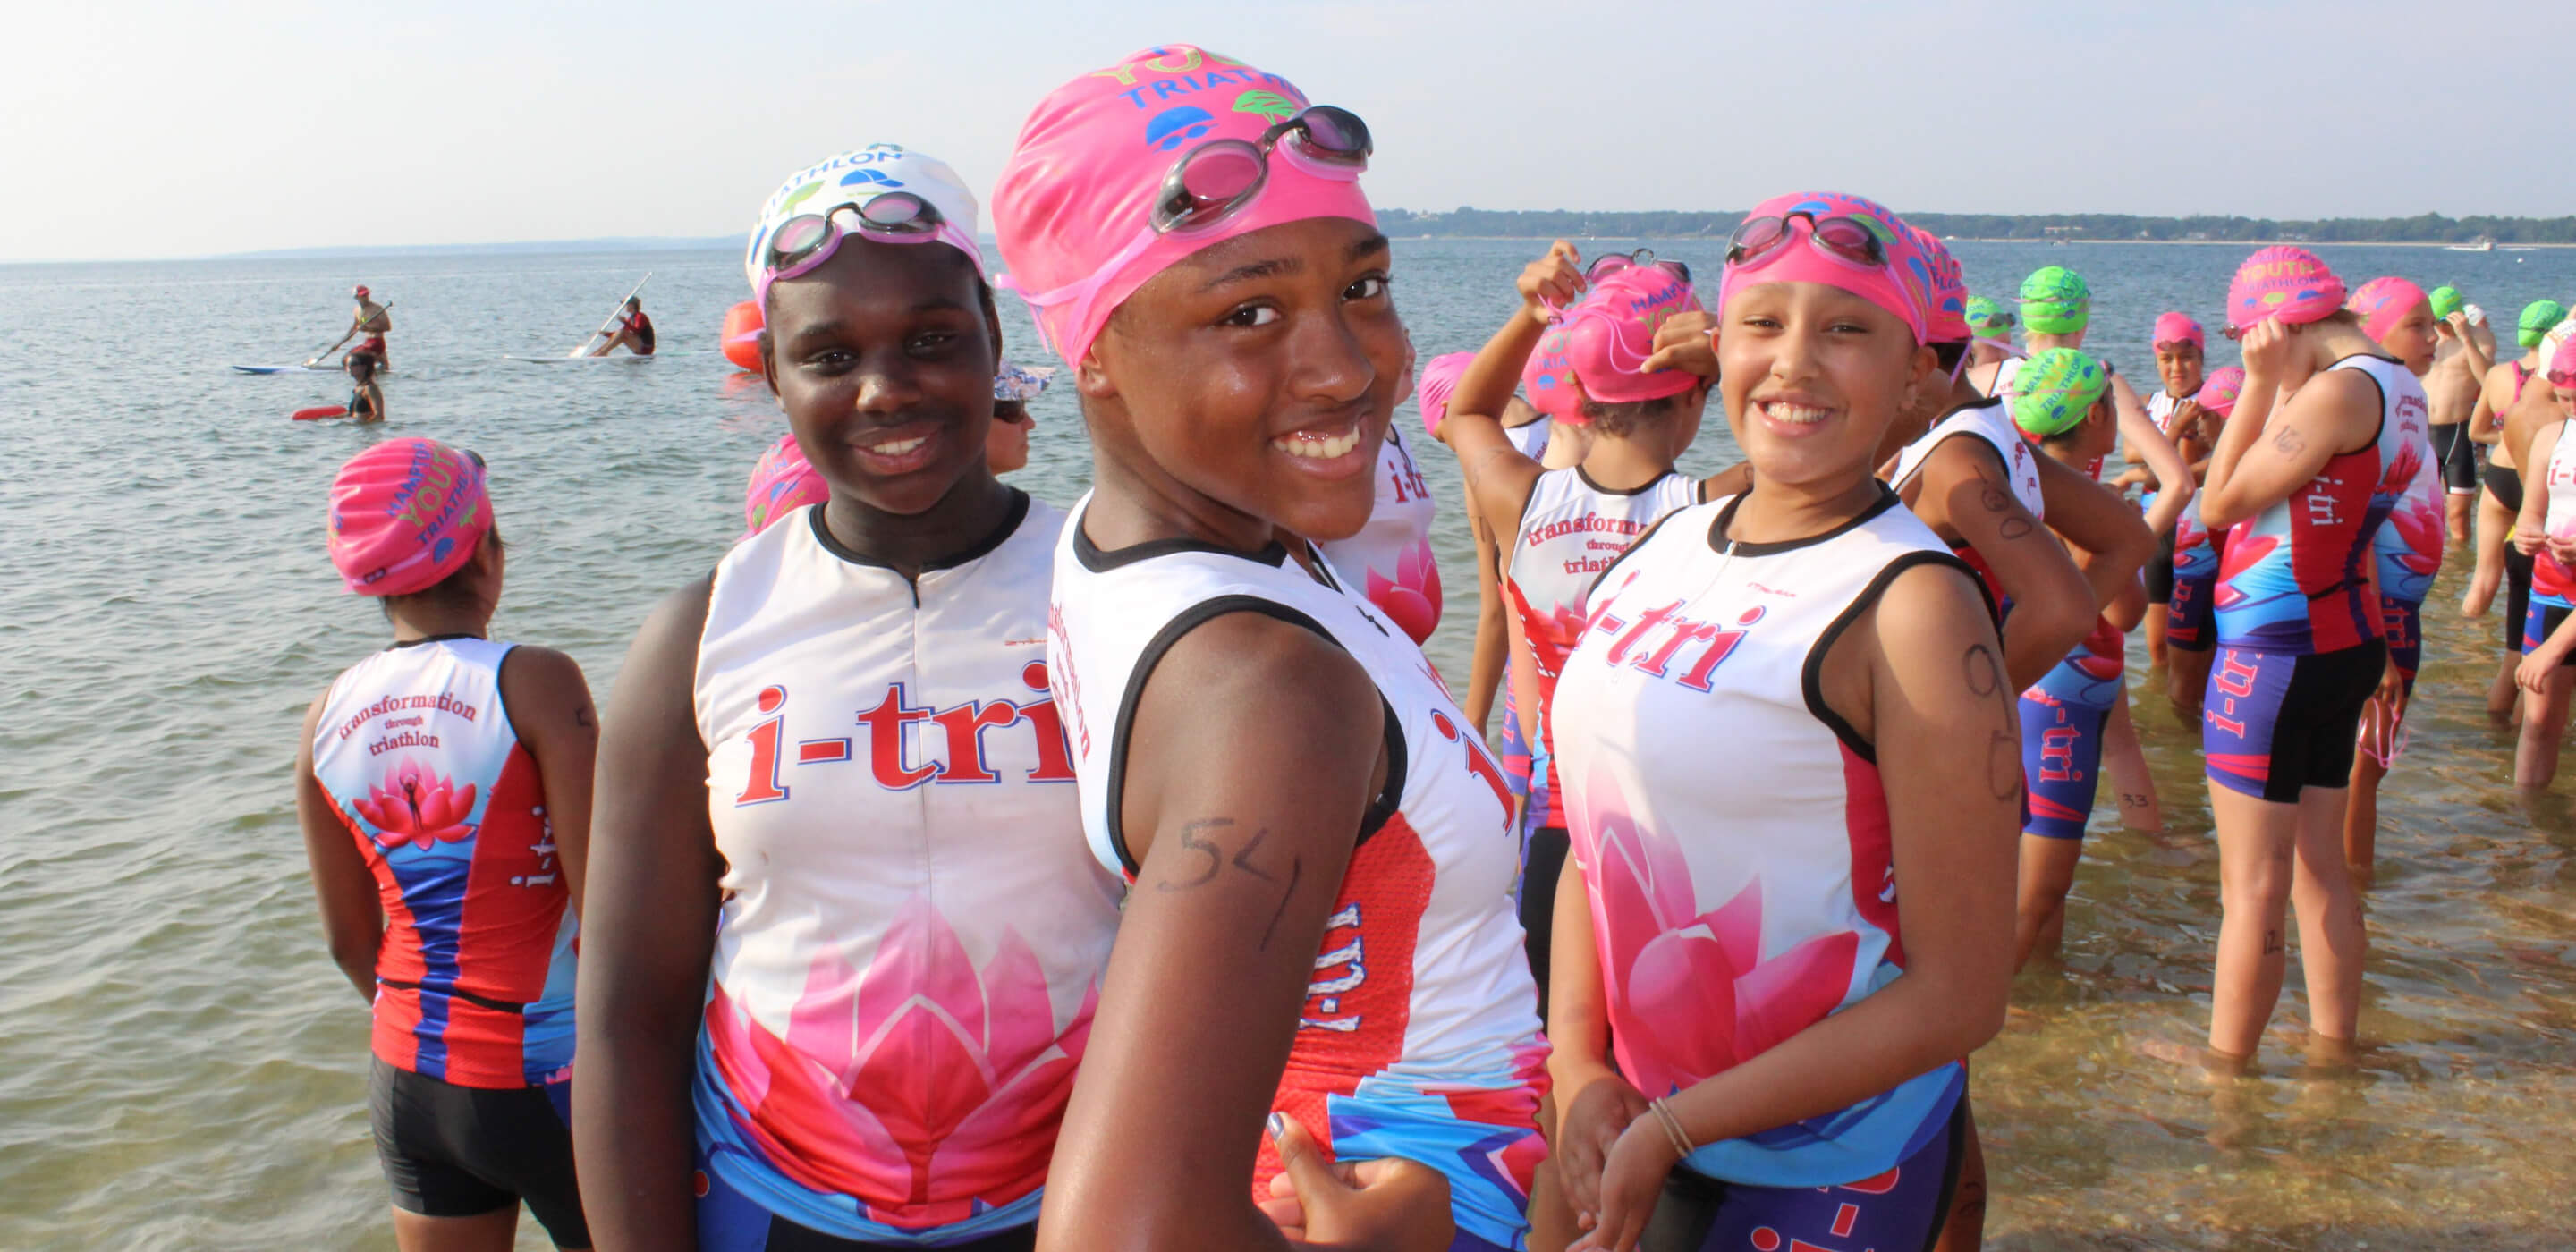 Swimmers in i-tri uniforms on beach